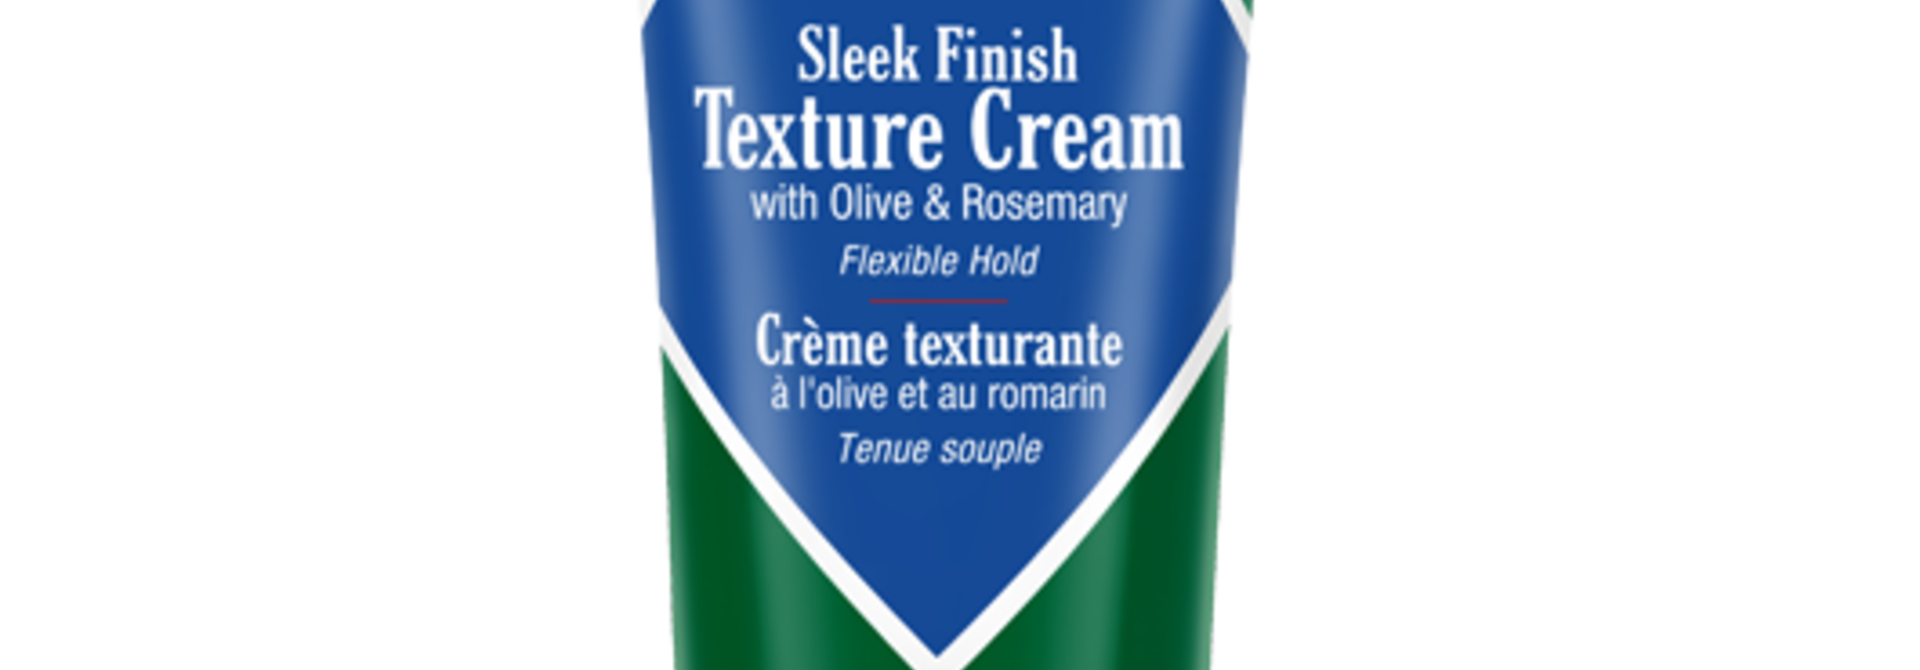 Sleek Finish Texture Cream | The Hair Care Collection